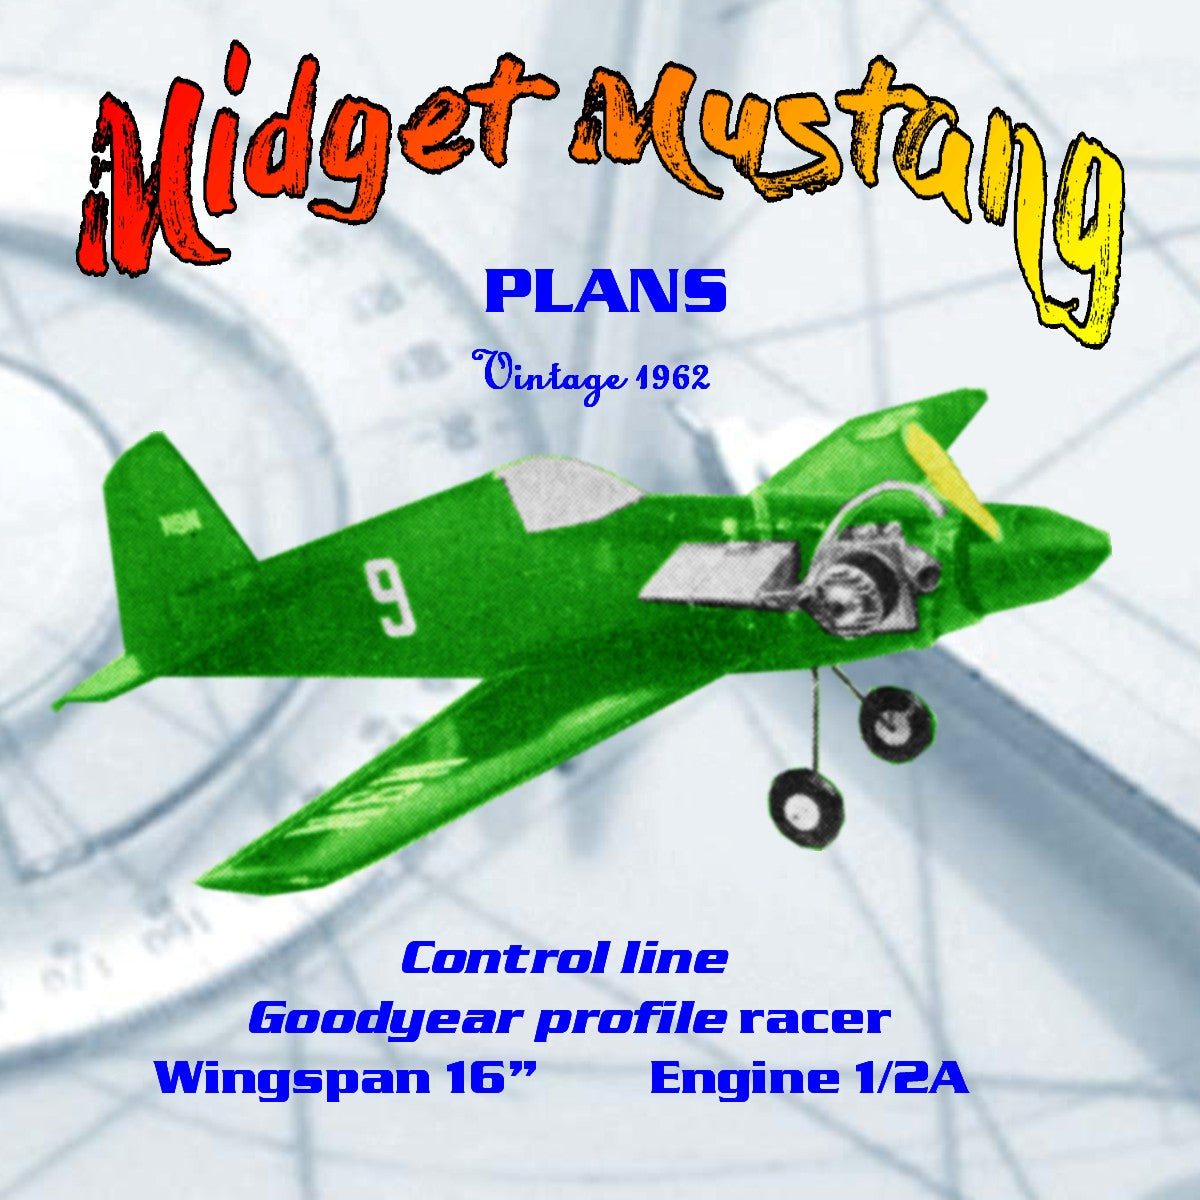 full size printed plan 1/2a goodyear profile racer midget mustang